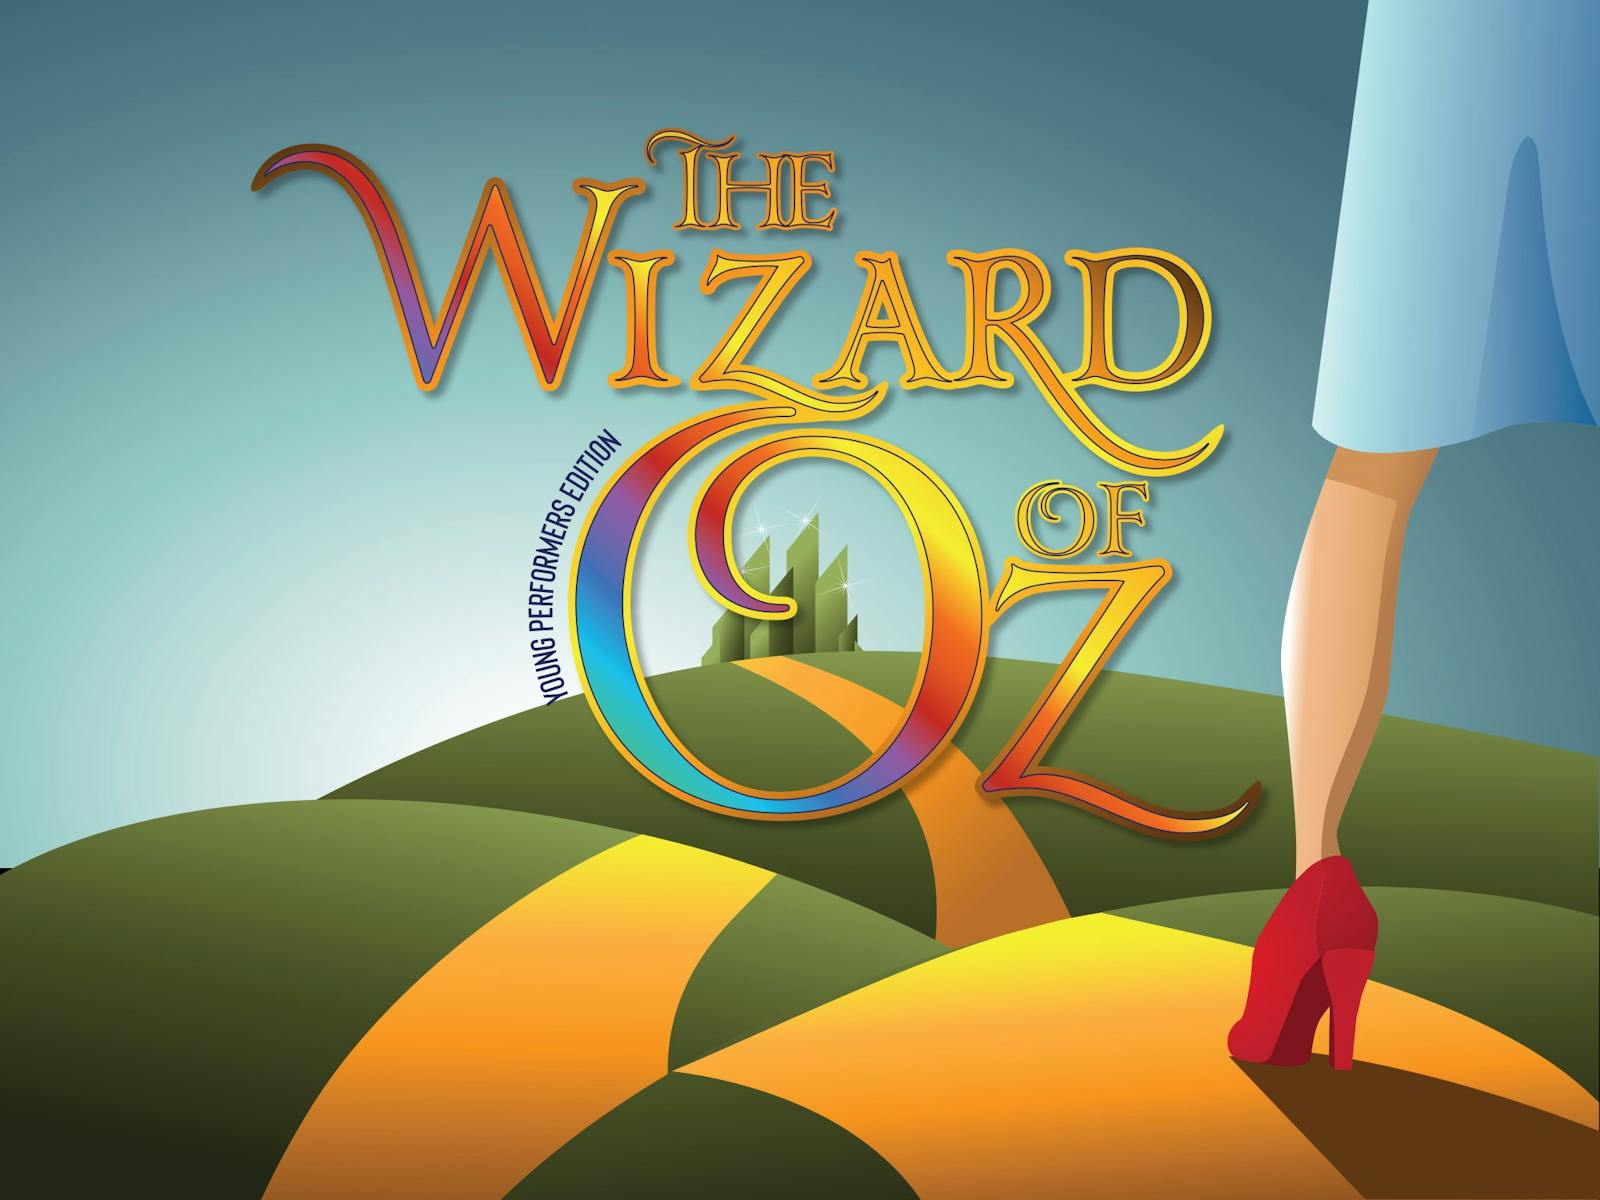 Image for Exitleft presents The Wizard of Oz